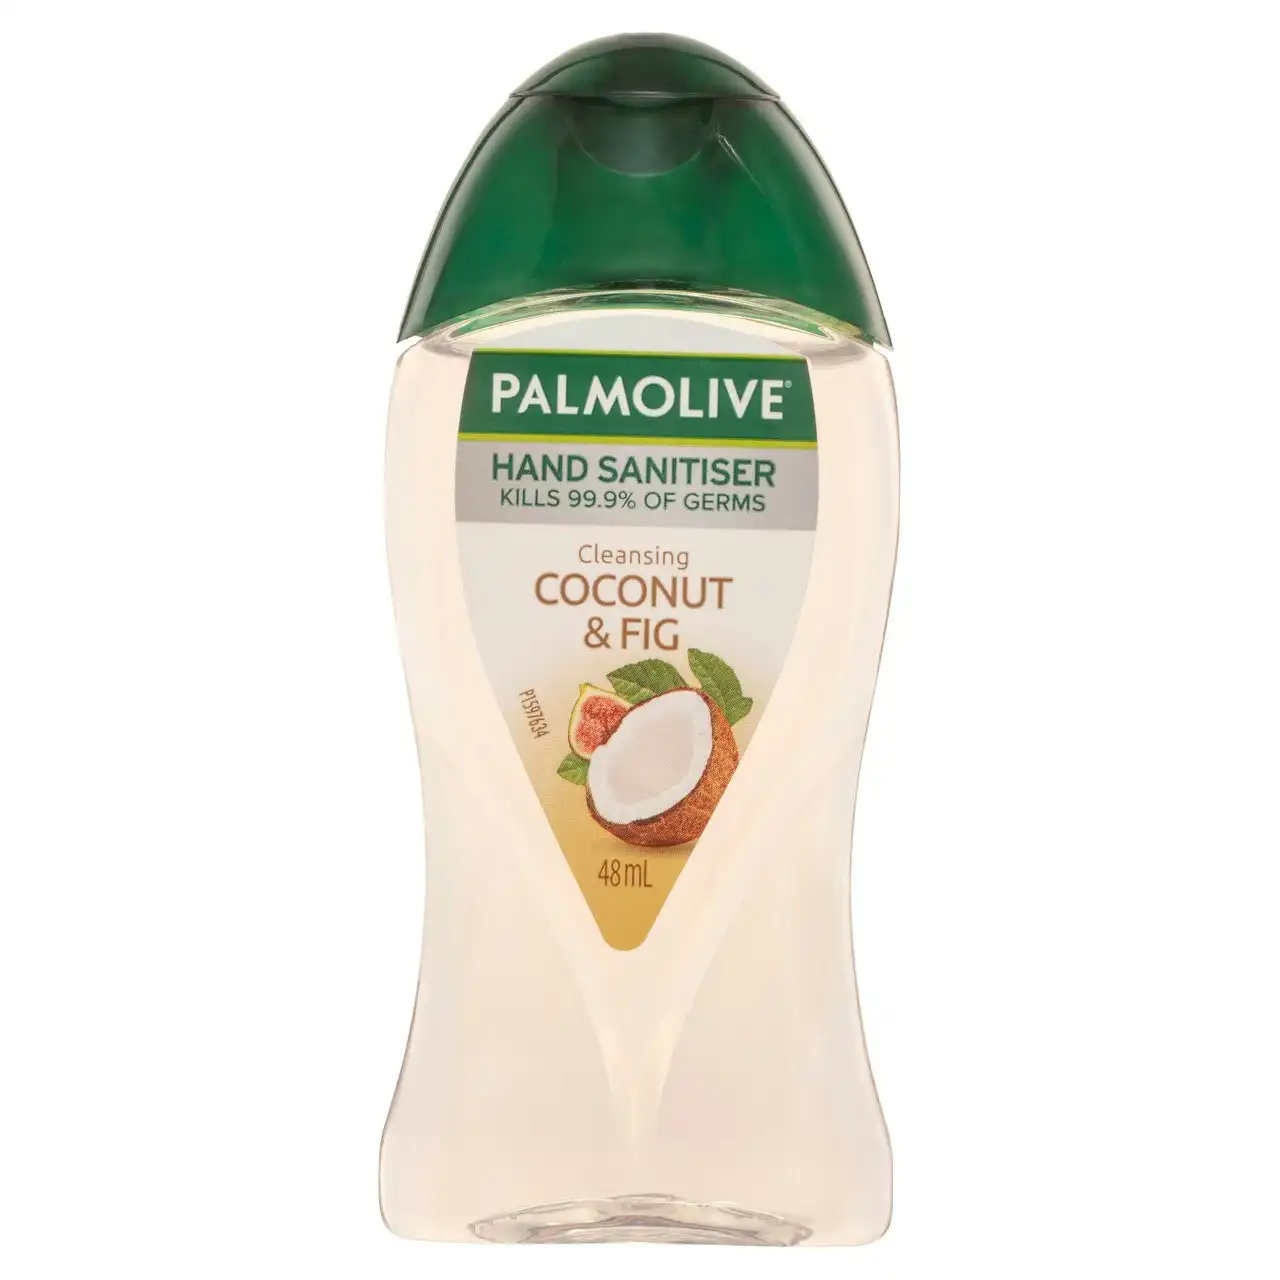 Palmolive Antibacterial Instant Hand Sanitiser, 48mL, Coconut & Fig, Travel Size, Kills 99.9% of Germs